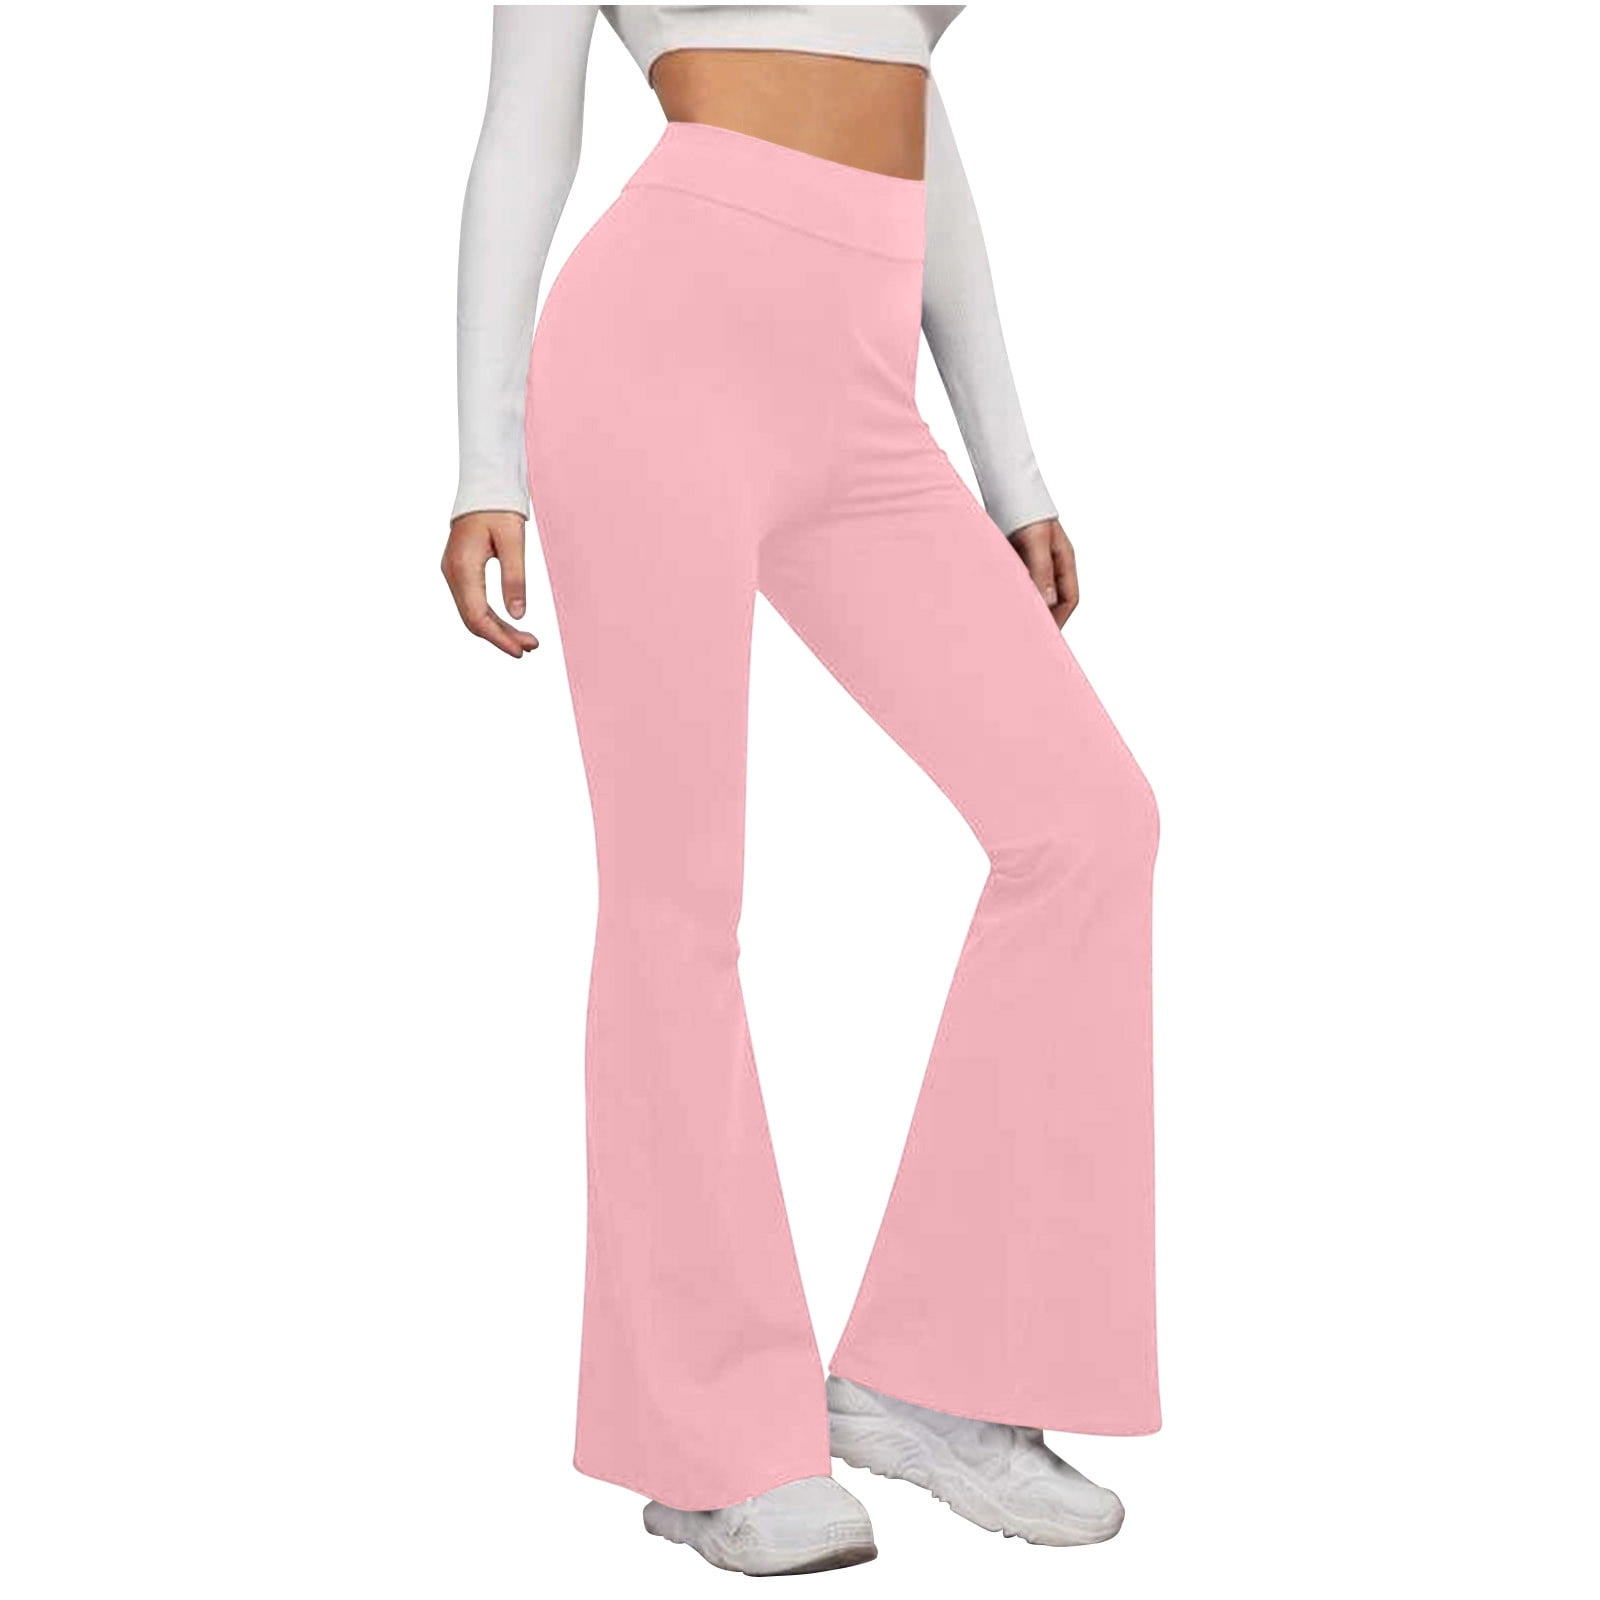 Flywake new years eve Yoga Pants for Women High Waisted Workout Pants Tummy  Control Workout Running Pants Long Bootleg Flare Pants Dress Pants 